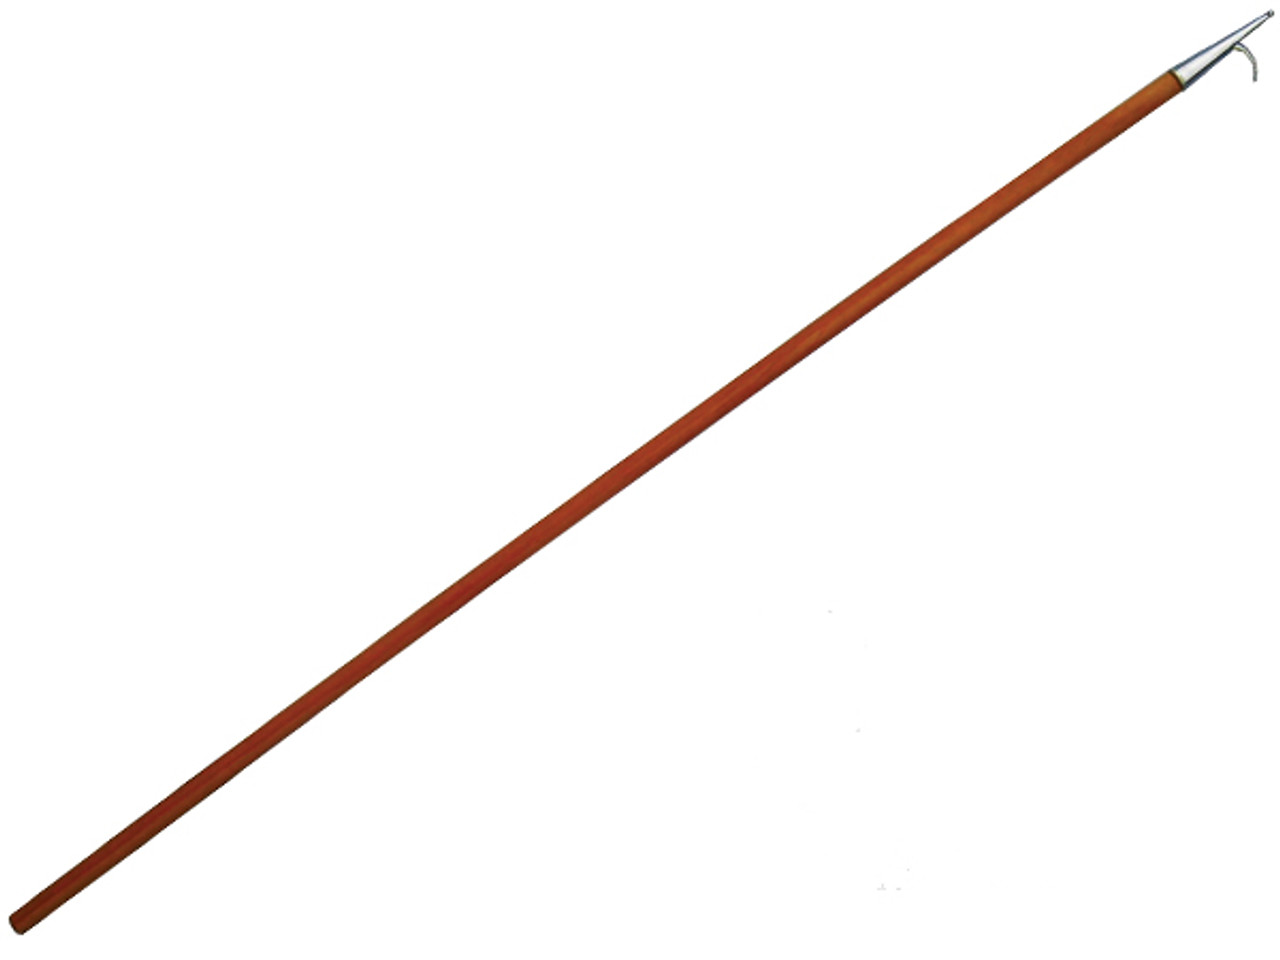 IMPA 330285 BOAT HOOK WOOD 3,5 mtr. WITH HOOK FOR LIFEBOAT